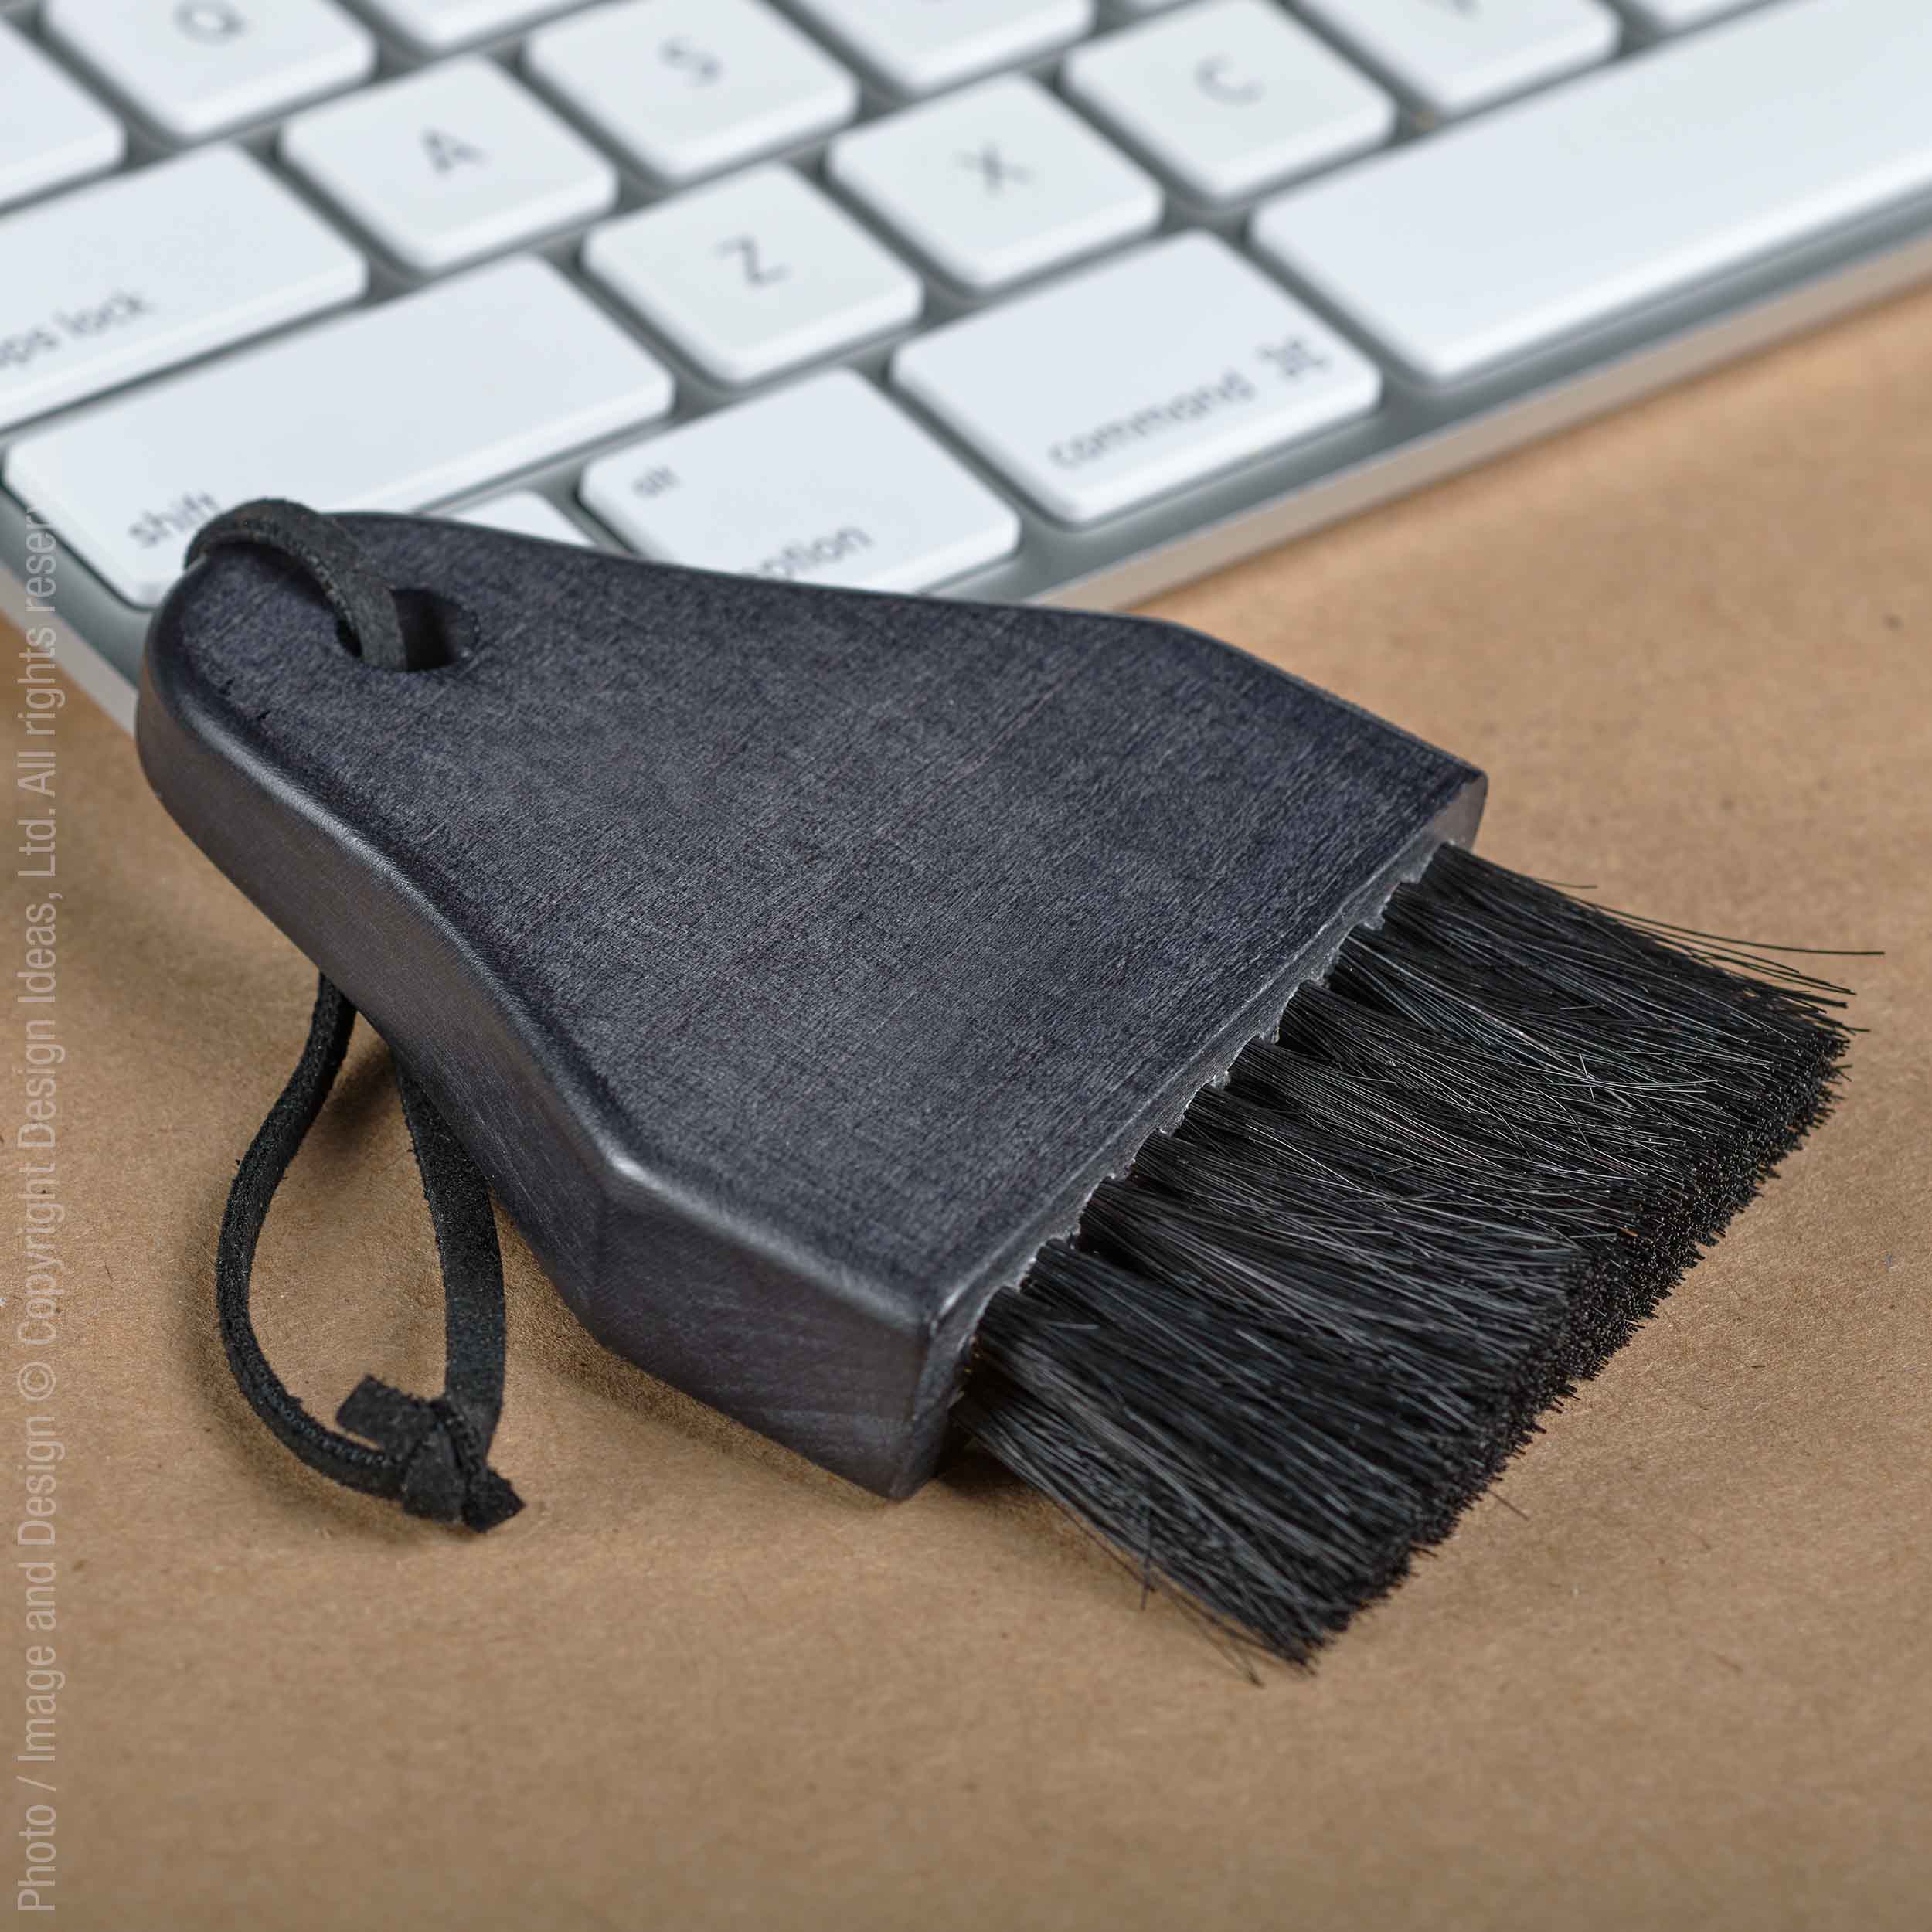 Cokala™ keyboard brush - Black | Image 1 | Premium Desk Accessory from the Cokala collection | made with Sycamore for long lasting use | texxture